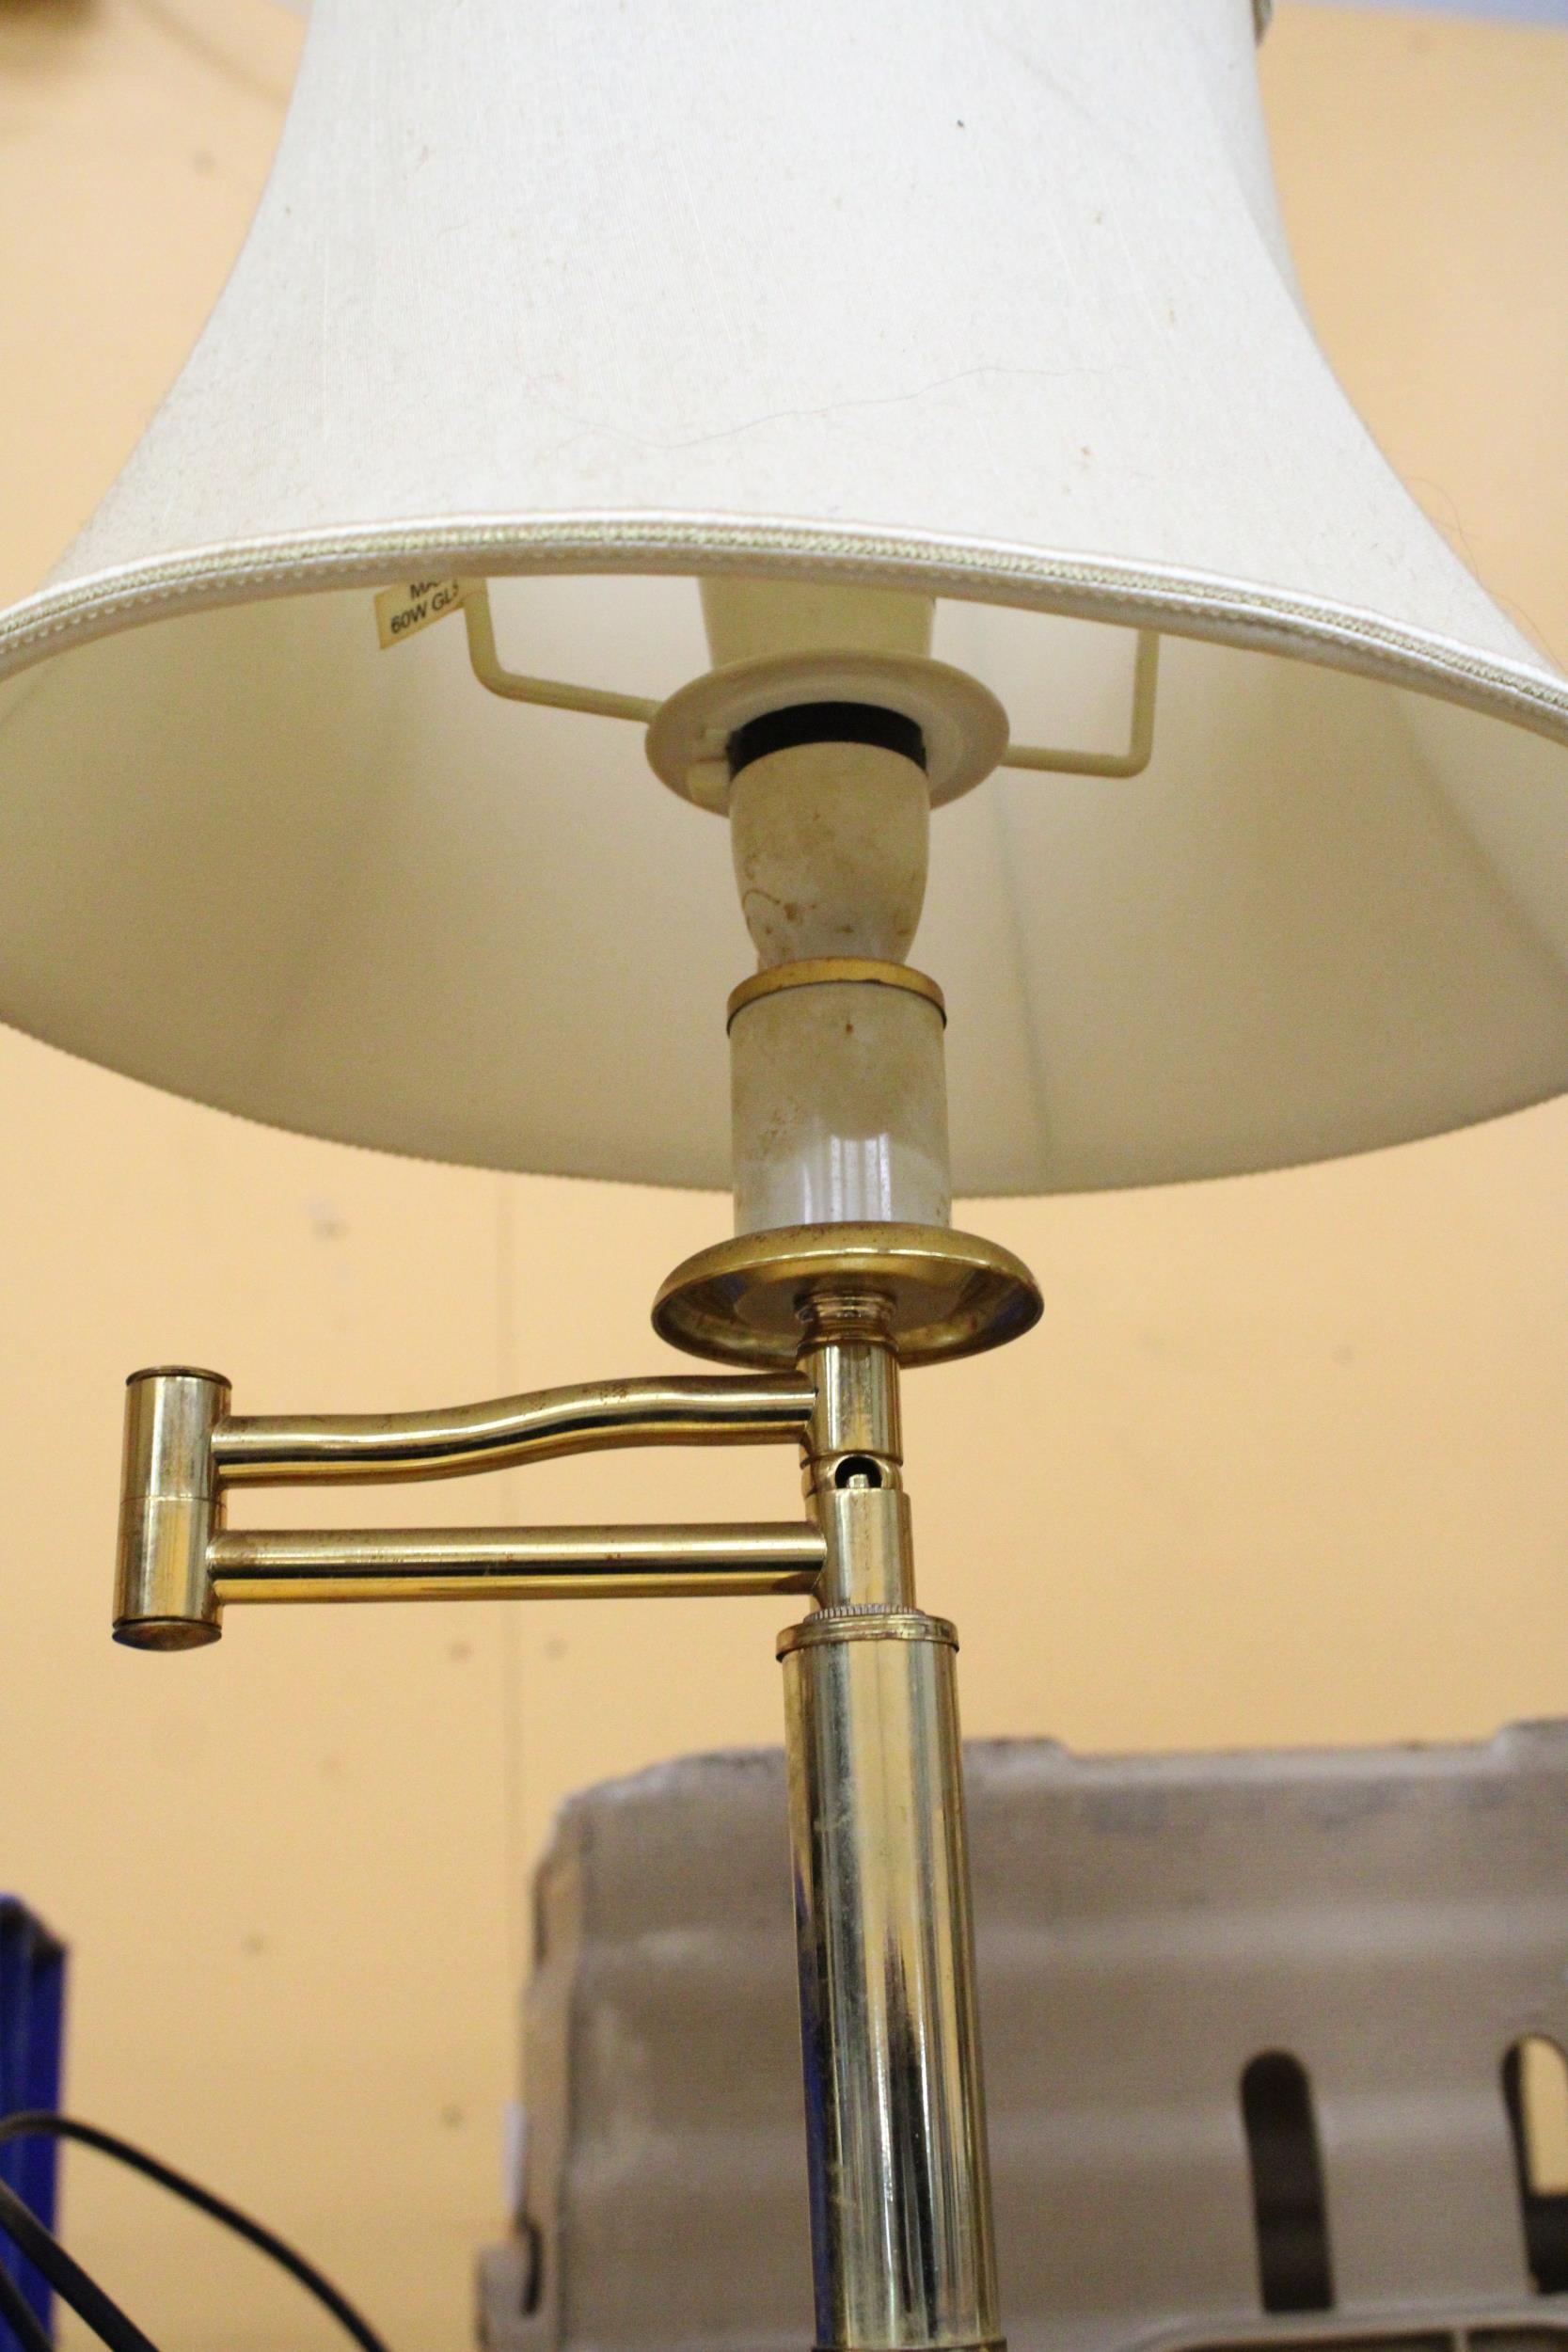 A PAIR OF VINTAGE SWING ARM BRASS LAMPS WITH SHADES - Image 4 of 5